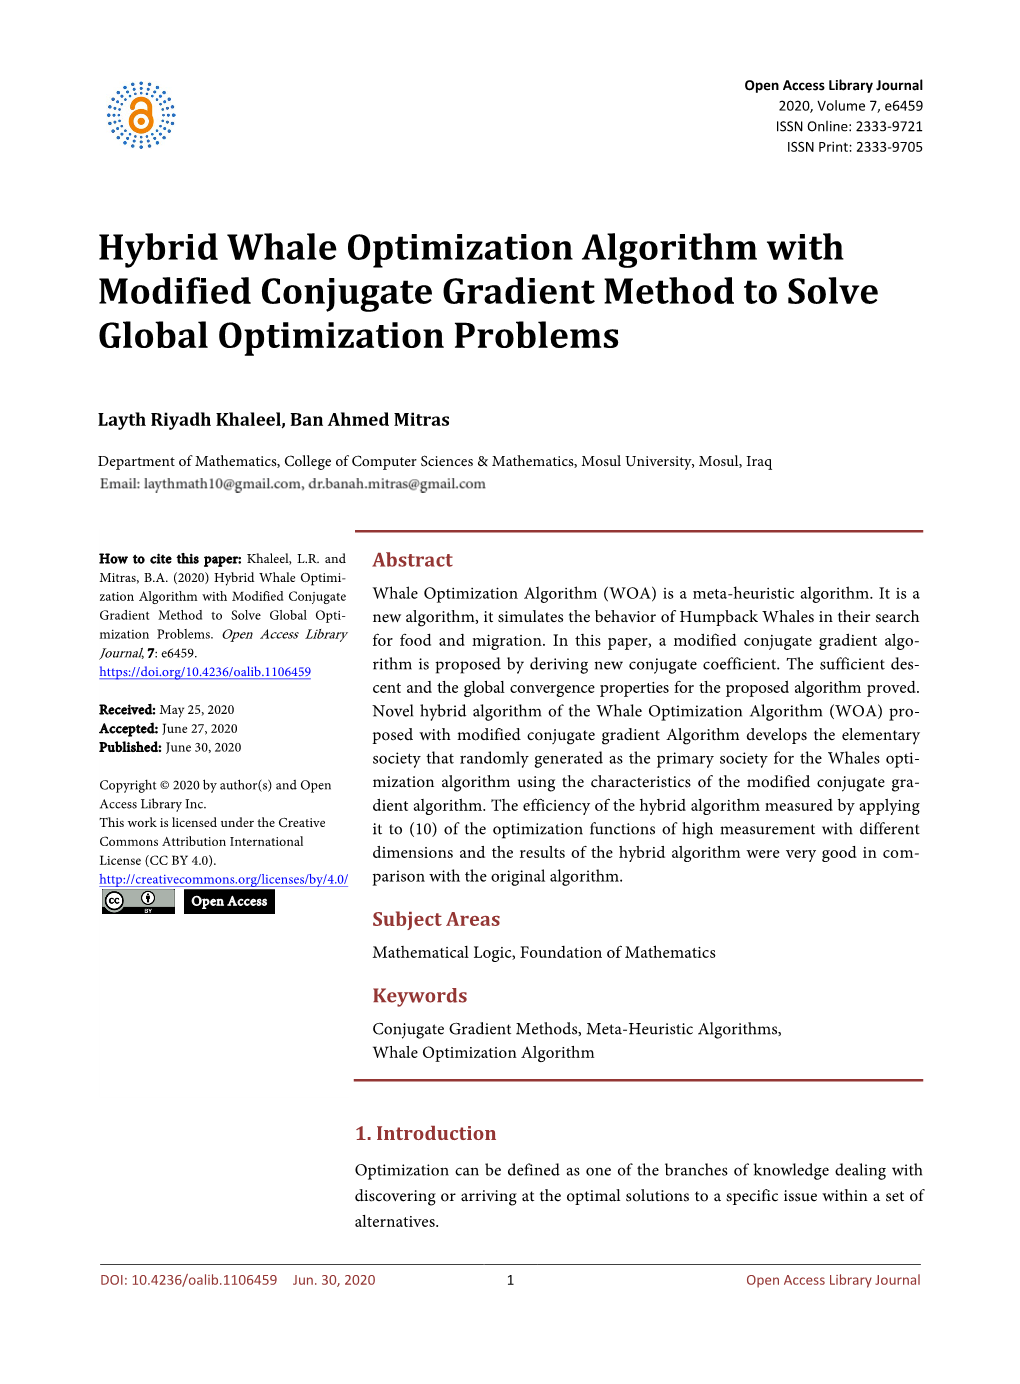 Hybrid Whale Optimization Algorithm with Modified Conjugate Gradient Method to Solve Global Optimization Problems